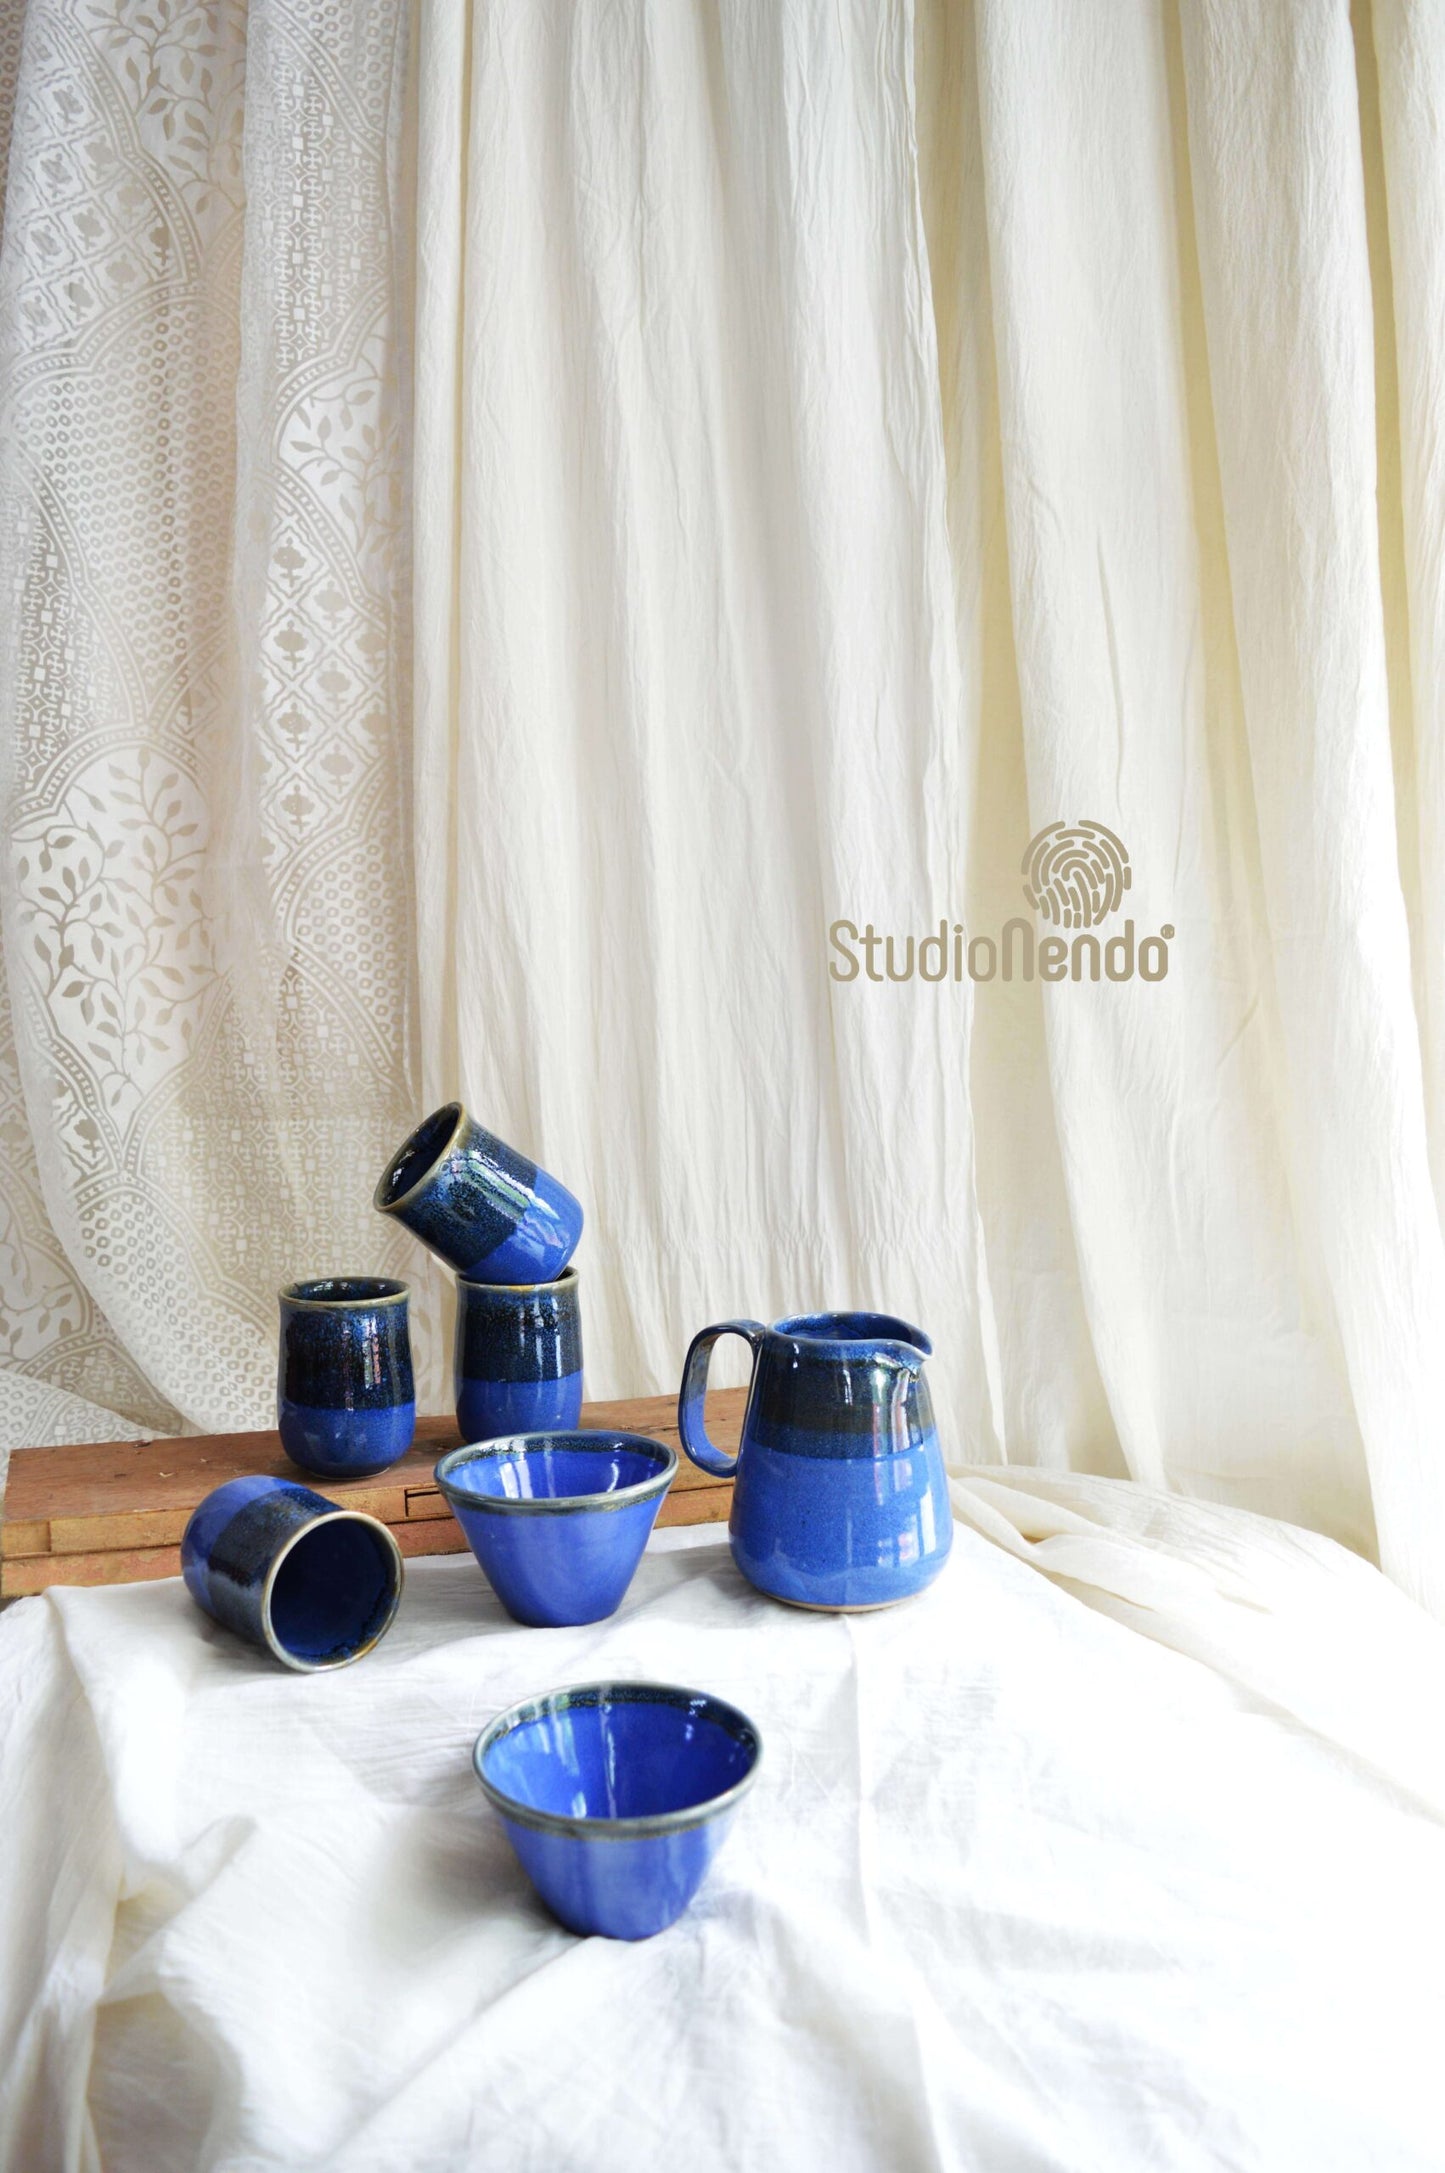 COFFEE/CHAI/MOJITO AND SNACKS FOR 4- HYGGE SET- BLUE/AMBER